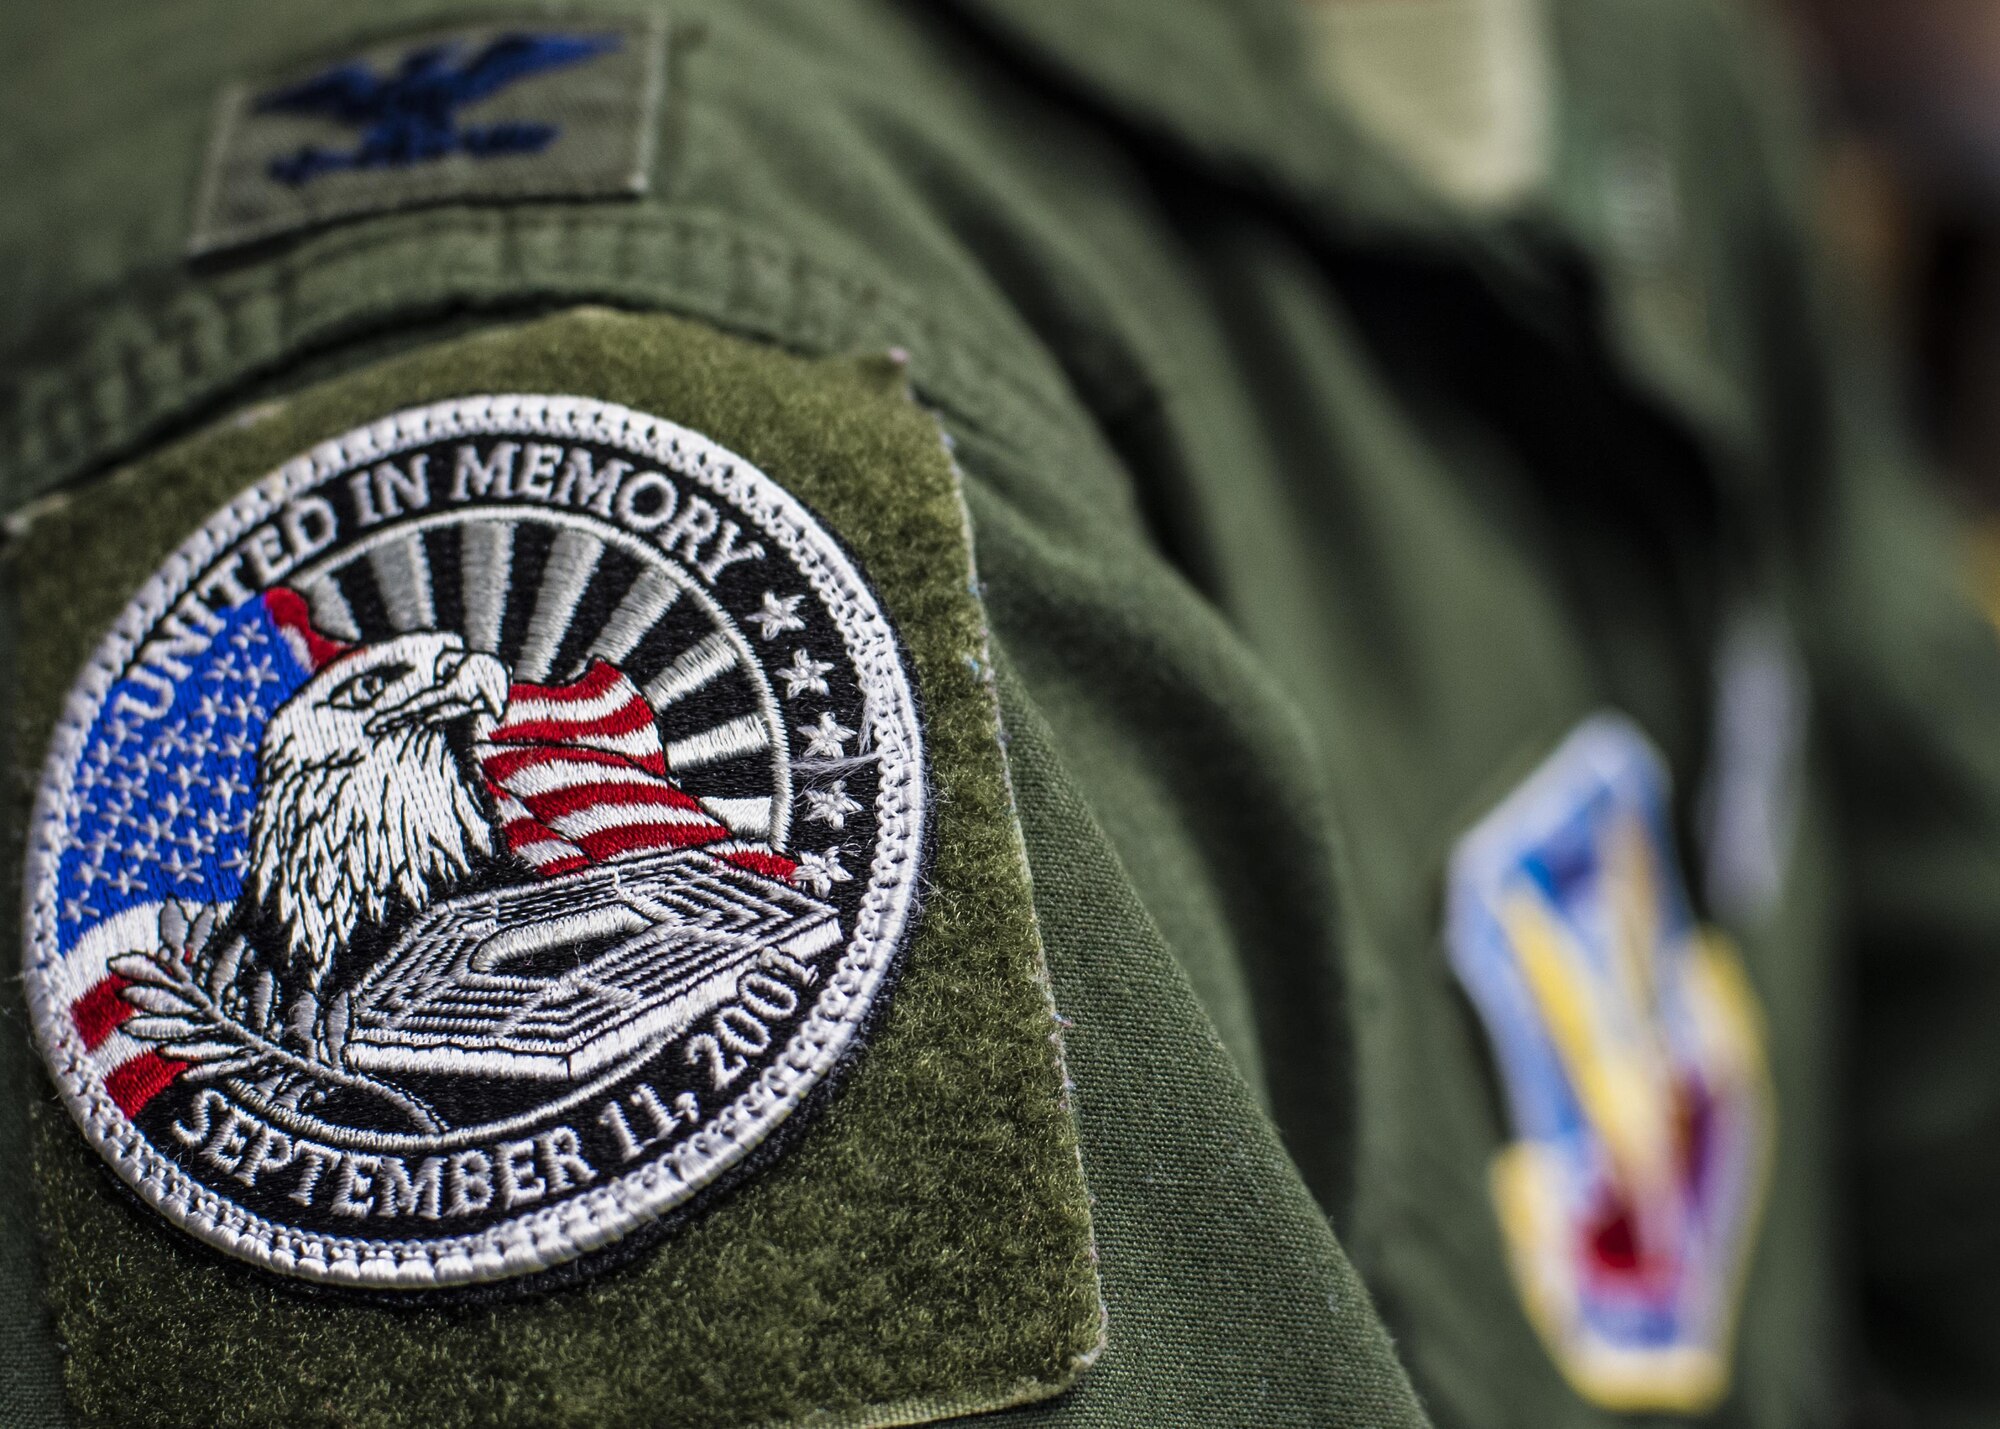 Col. Houston Cantwell, the 49th Wing commander wears a 9/11 remembrance patch on his flight suit at Holloman Air Force Base, N.M., on Sept. 8, 2016. During the terror attacks, Cantwell was working on the fifth floor of the Pentagon, just one corner away from where the airliner struck. (U.S. Air Force photo by Senior Airman Emily Kenney)